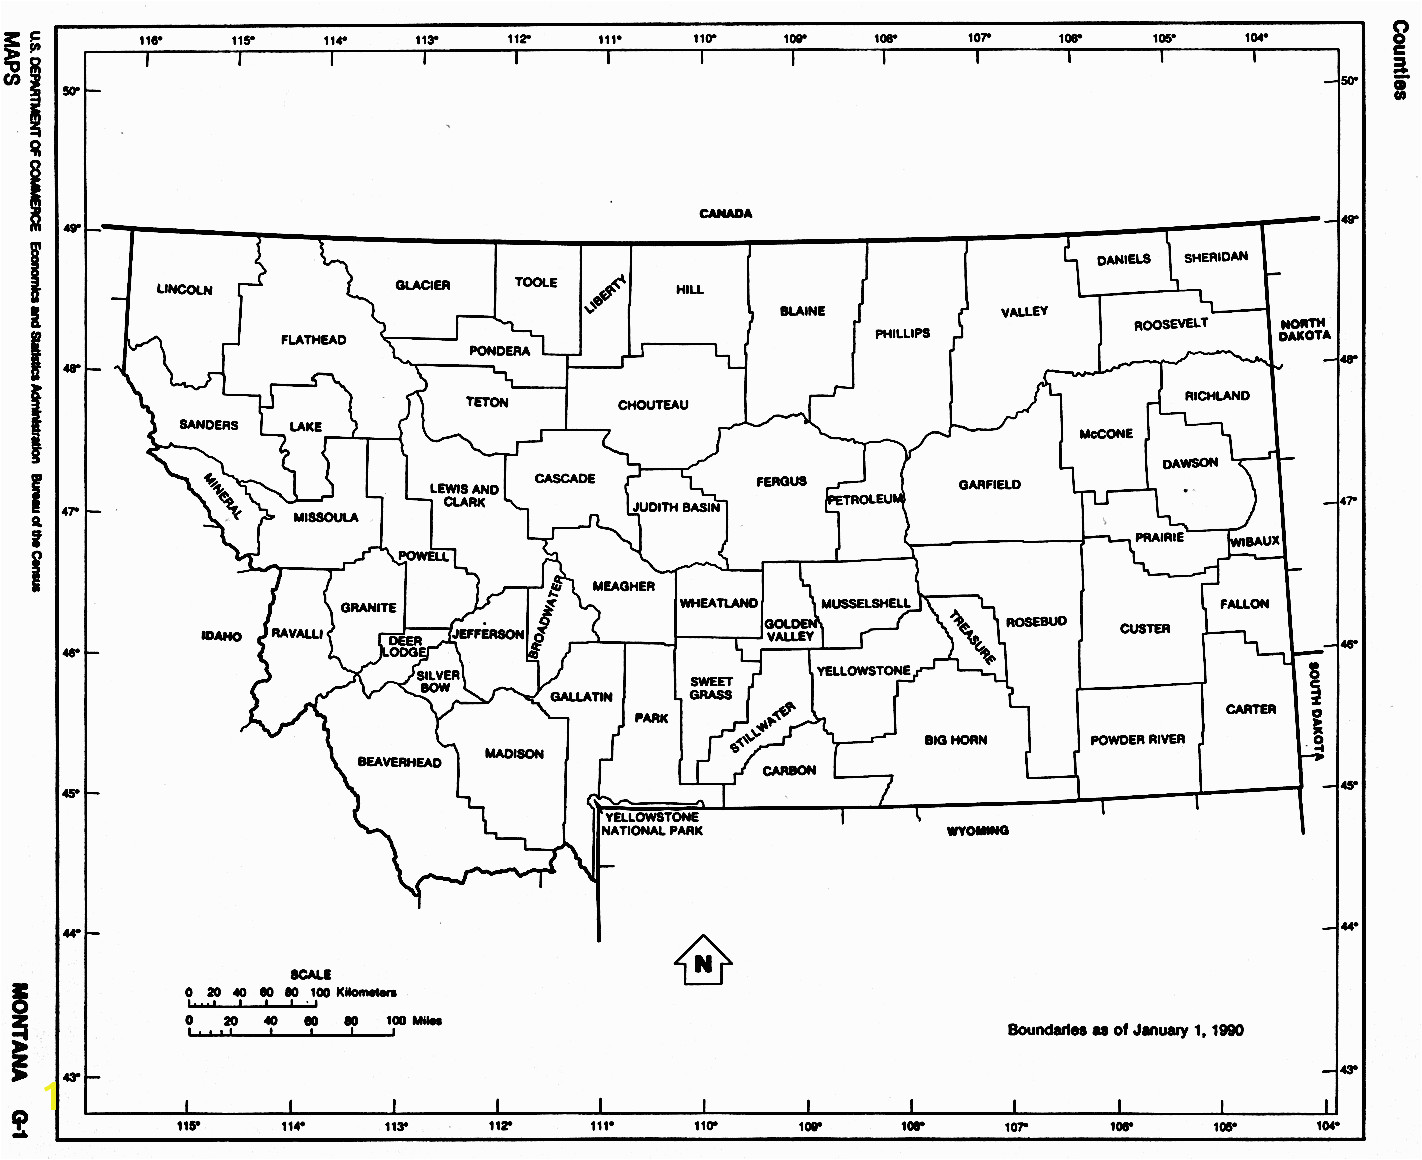 University Of Texas Coloring Pages U S County Outline Maps Perry Casta±eda Map Collection Ut